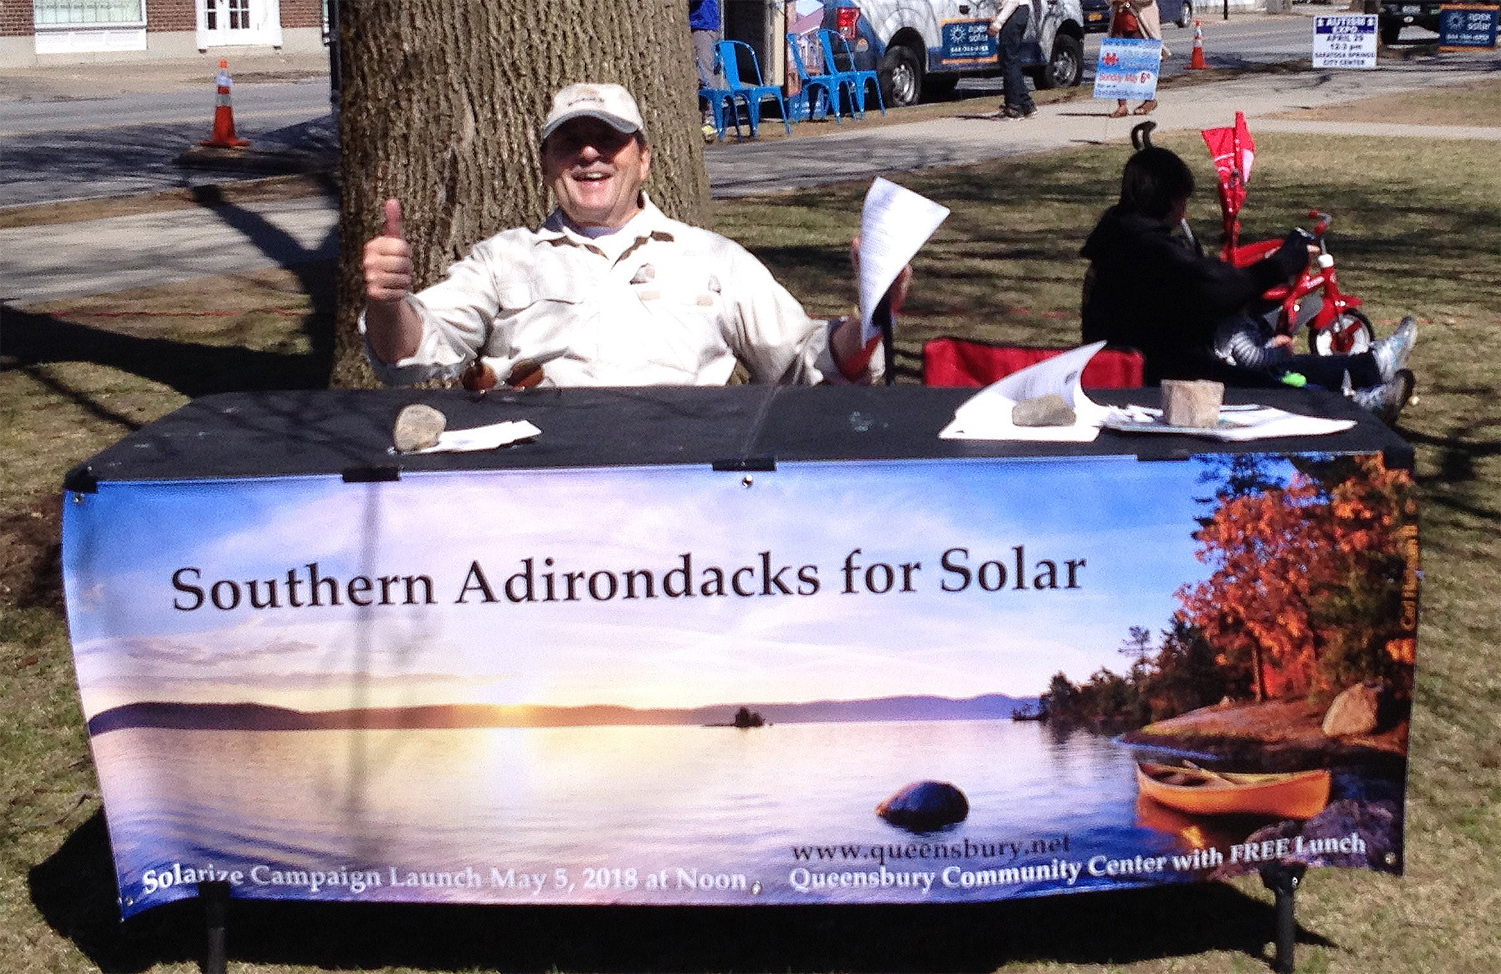 https://www.queensbury.net/youre-invited-southern-adirondacks-for-solar-program-kickoff/